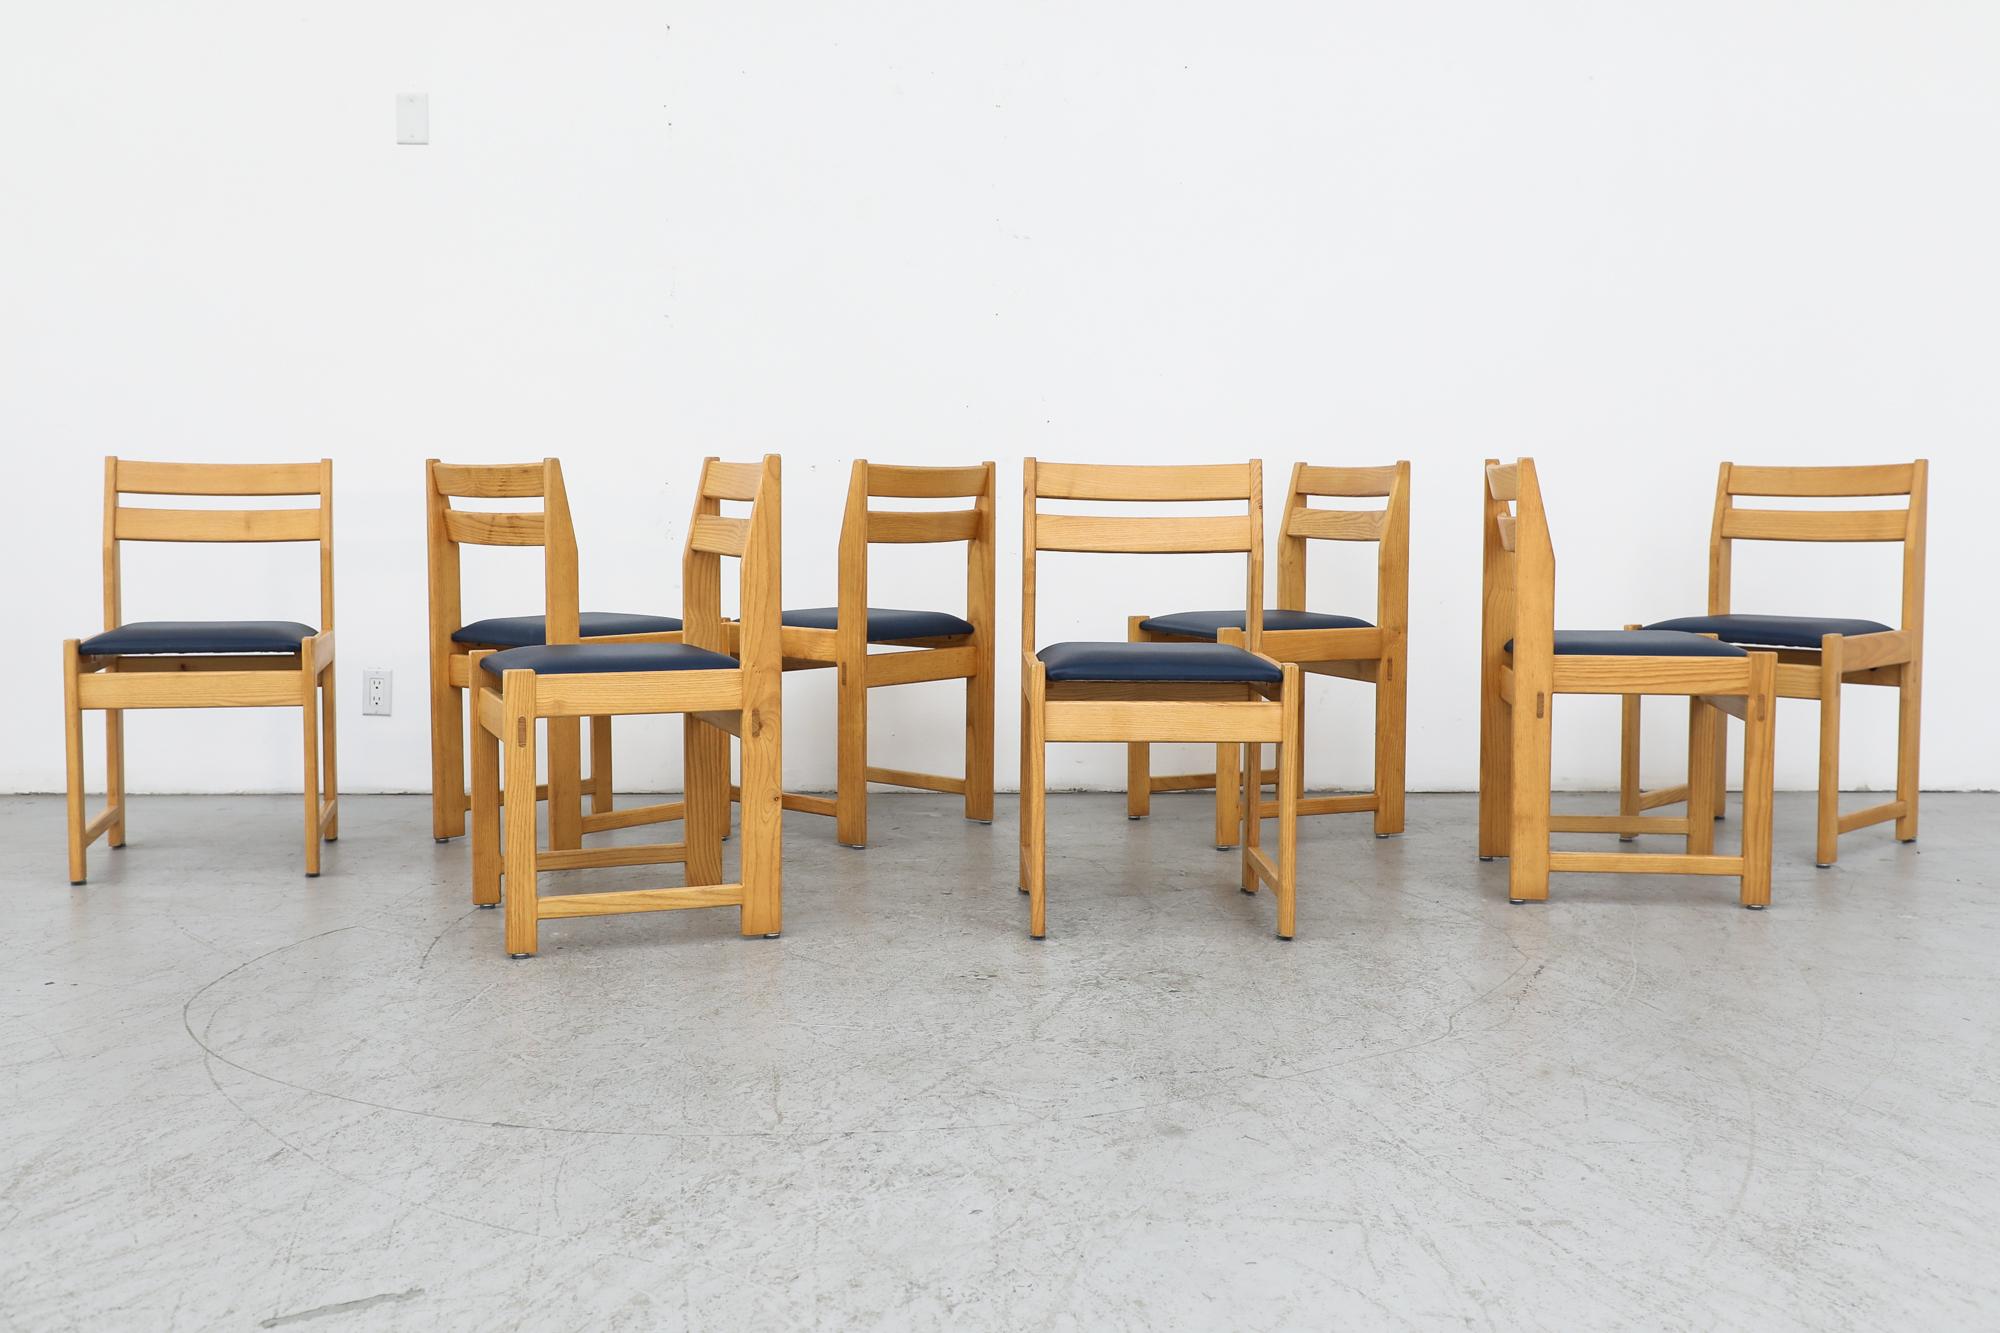 Set of 8 natural oak ladder back dining chairs by Ate van Apeldoorn for Houtwerk Hattem. Oak frames with slanted backrest and blue vinyl seat cushions. In original condition with visible wear consistent with their age and use. Set price. 